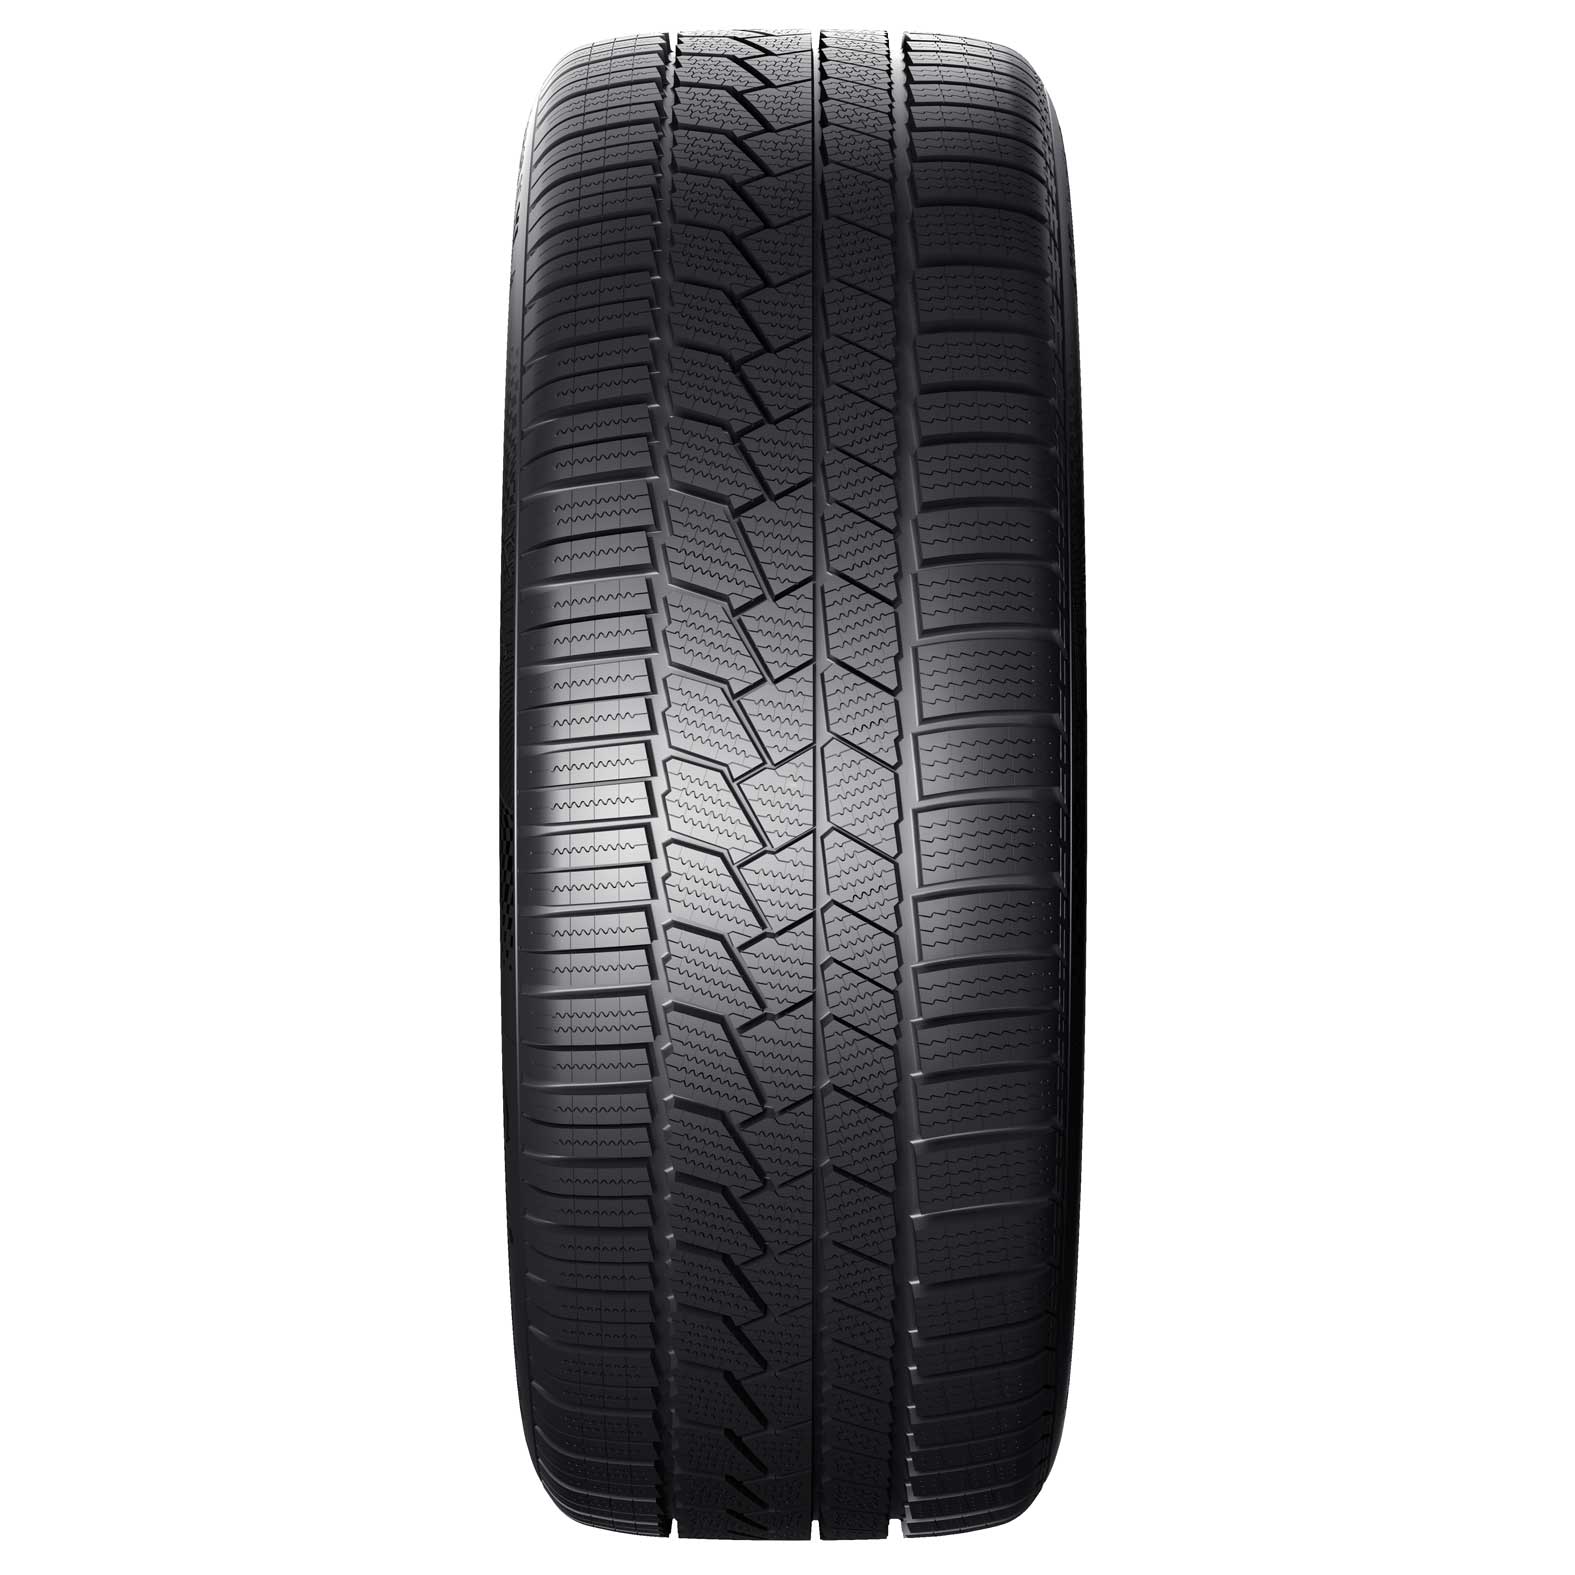 Continental WinterContact TS860 Tires Winter Tire S for | Kal